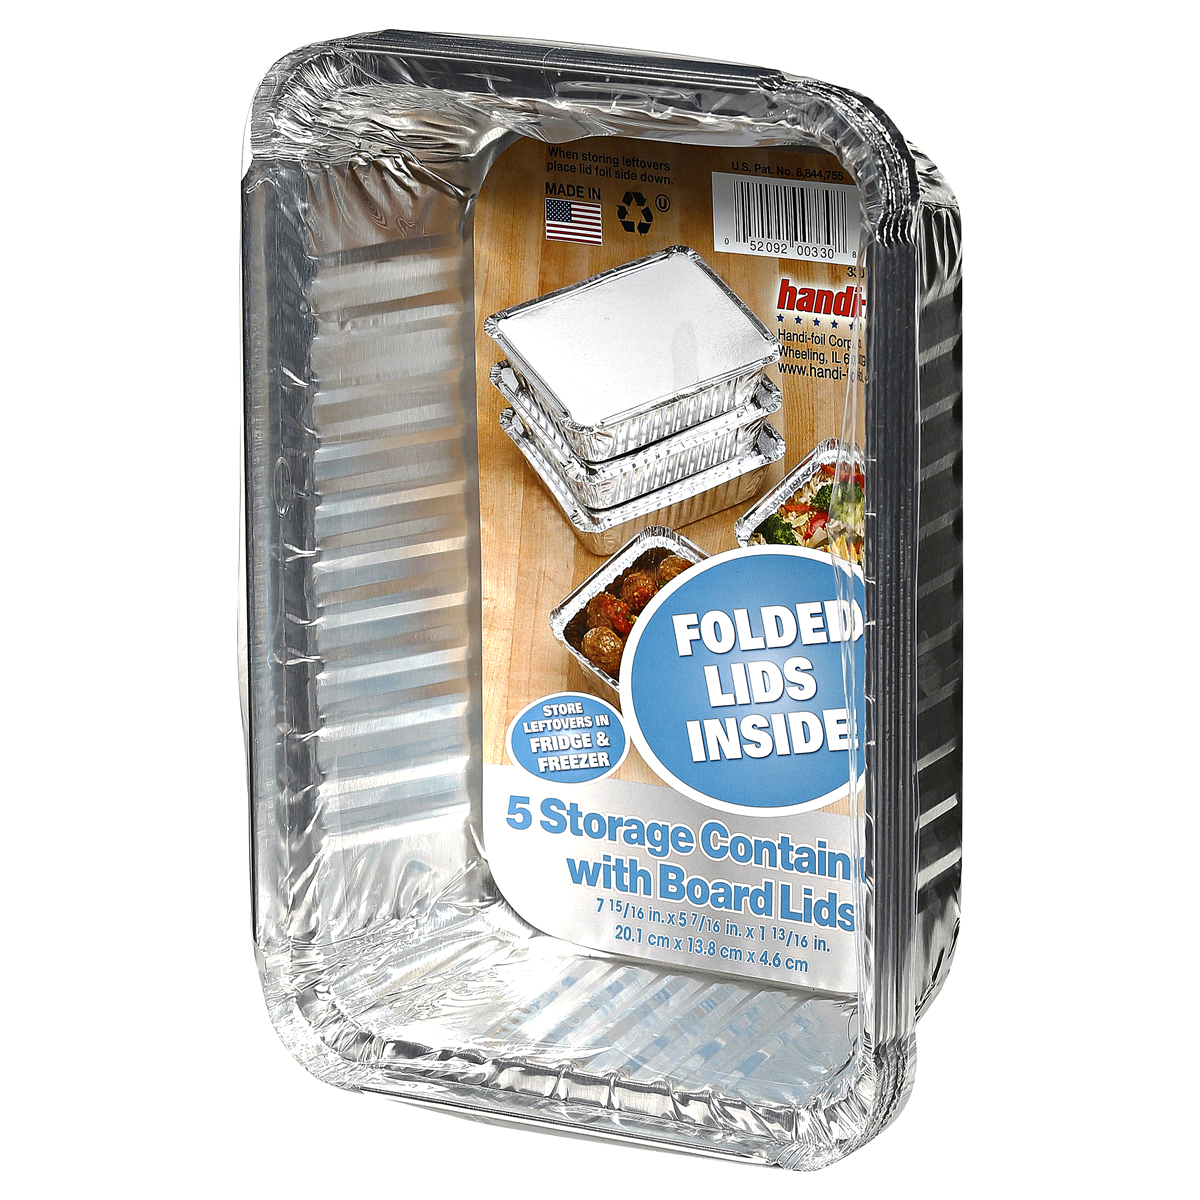 slide 4 of 4, Handi-foil Storage Containers with Board Lids, 5 ct